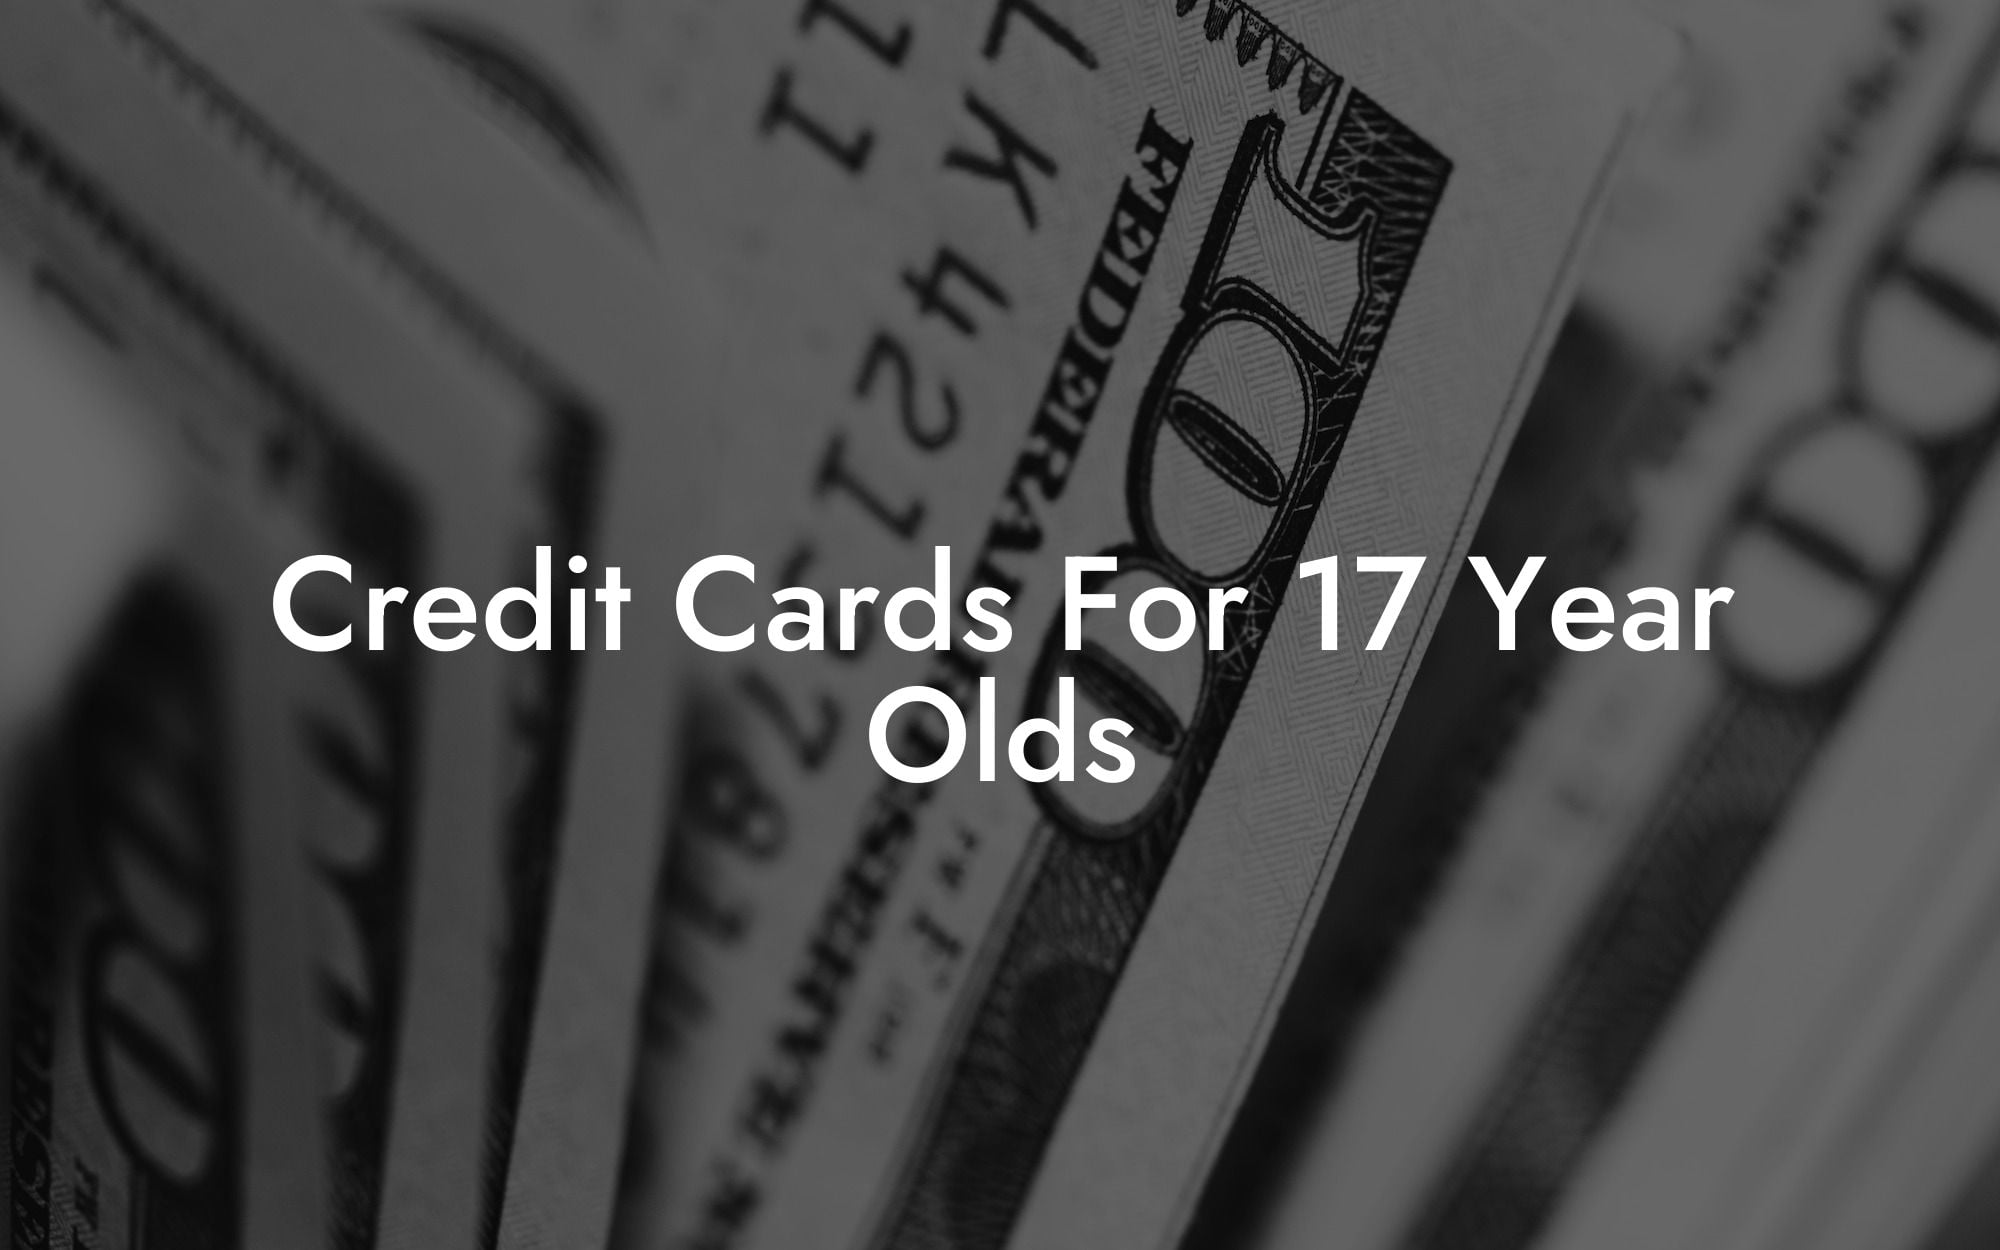 Credit Cards For 17 Year Olds